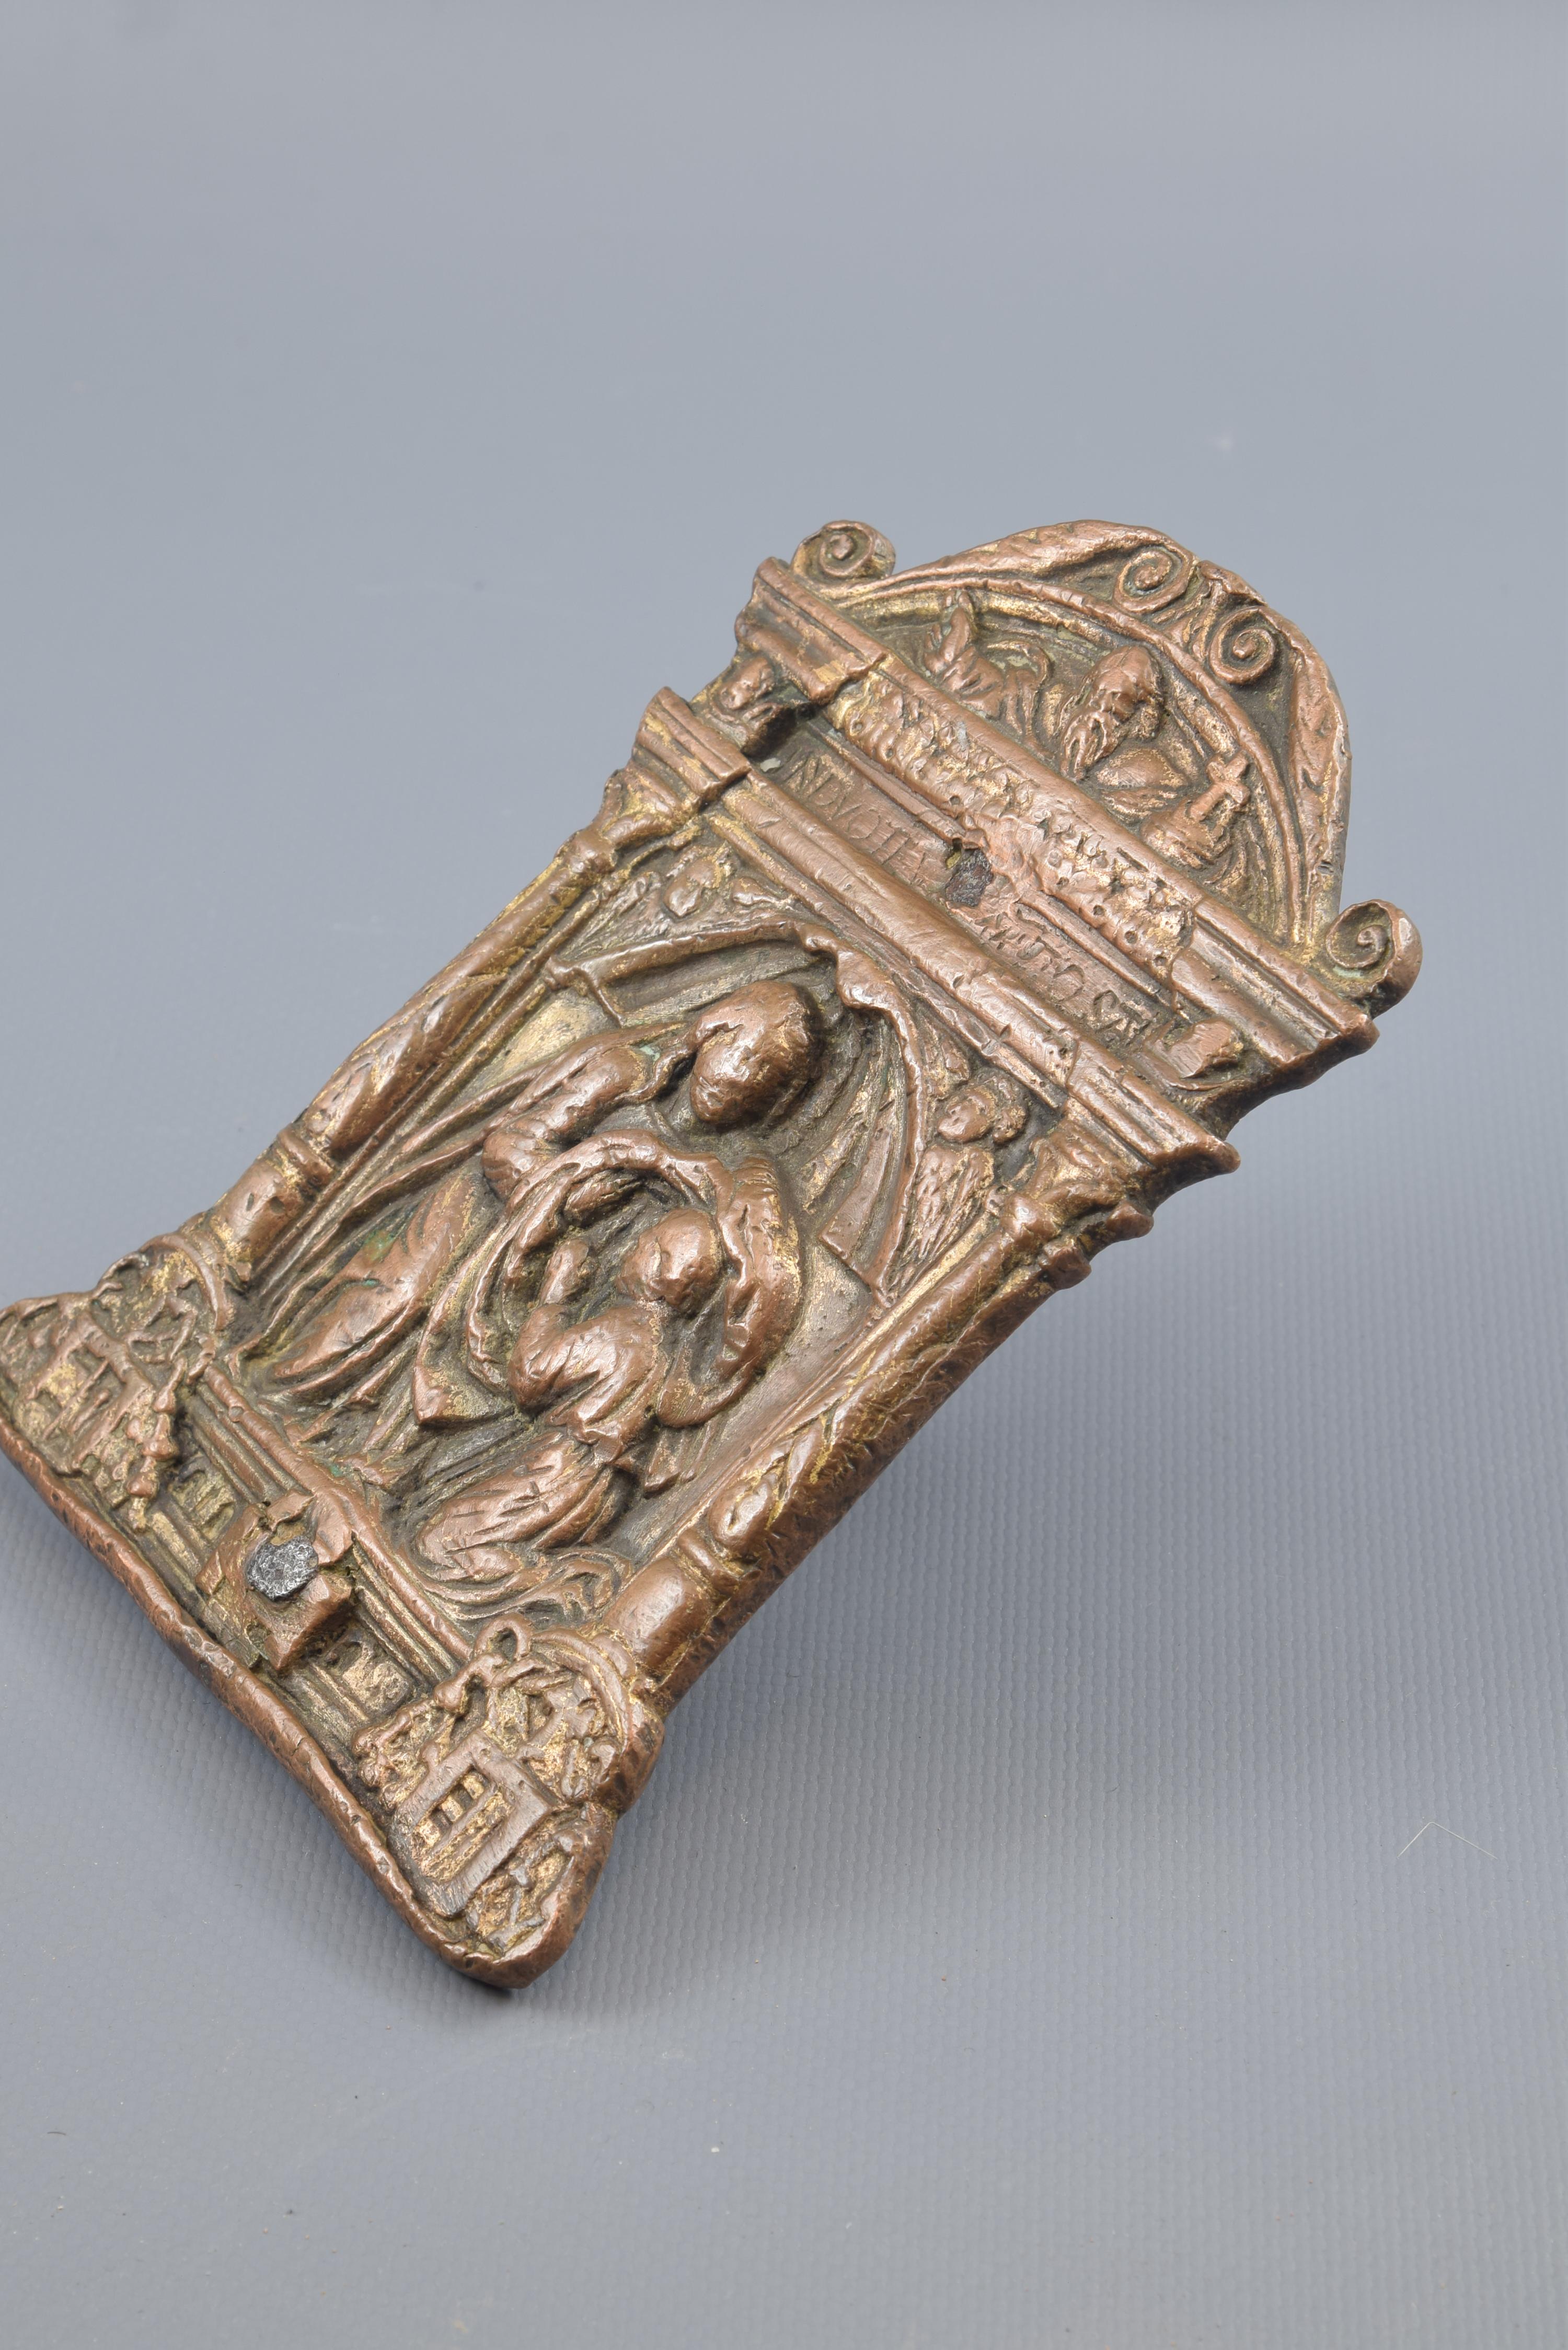 Paper holder bronze, 16th century.
Bronze paper holder with handle in the shape of a torsa column on the back (area decorated with a work of rhombuses and flowers). The front presents an architectural framework of classical influence (scrolls,